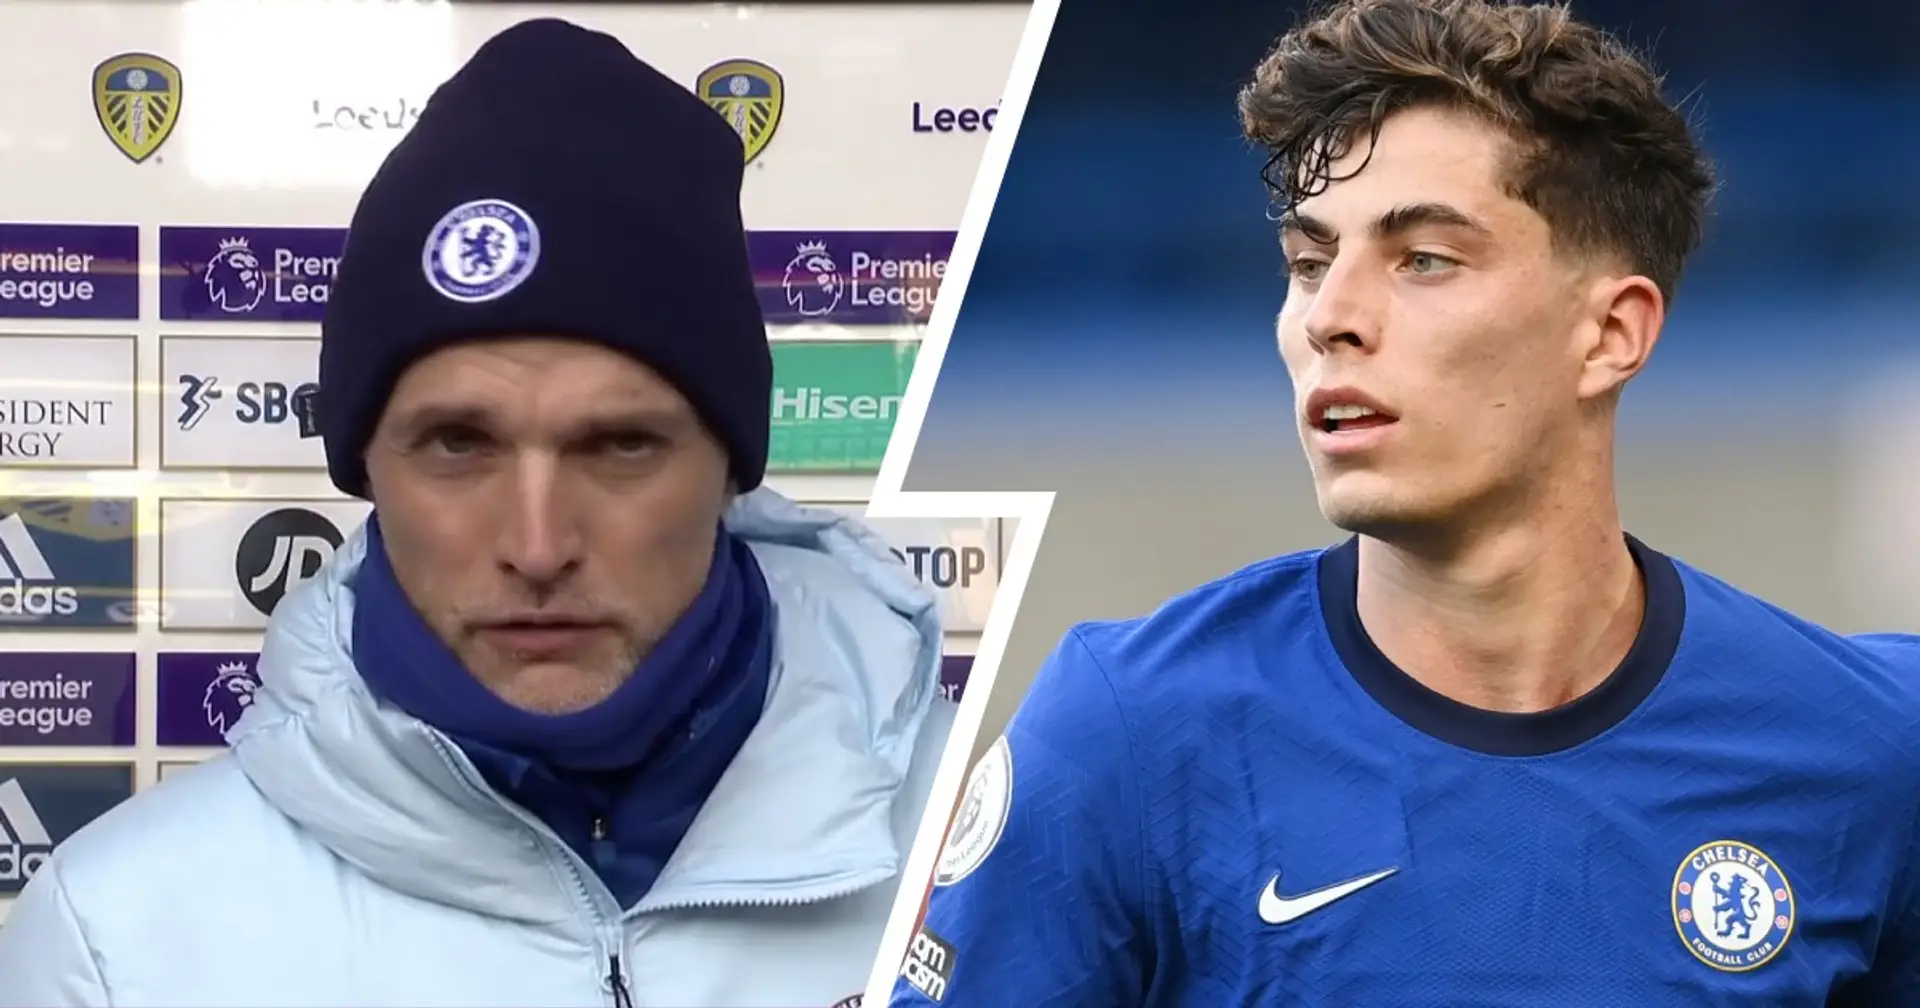 'Lazy' Havertz claim shut down, Tuchel on rotation policy and more: Latest Chelsea news round-up